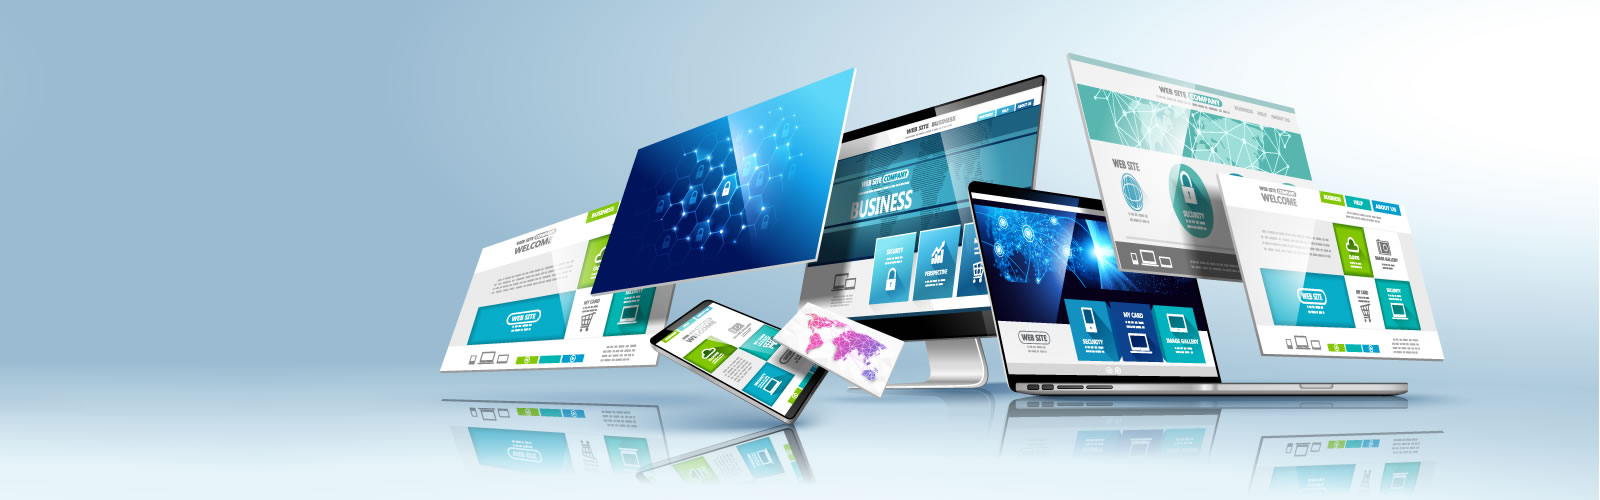 Opt For The Best Web Design Birmingham Services To Expose Your Online Business